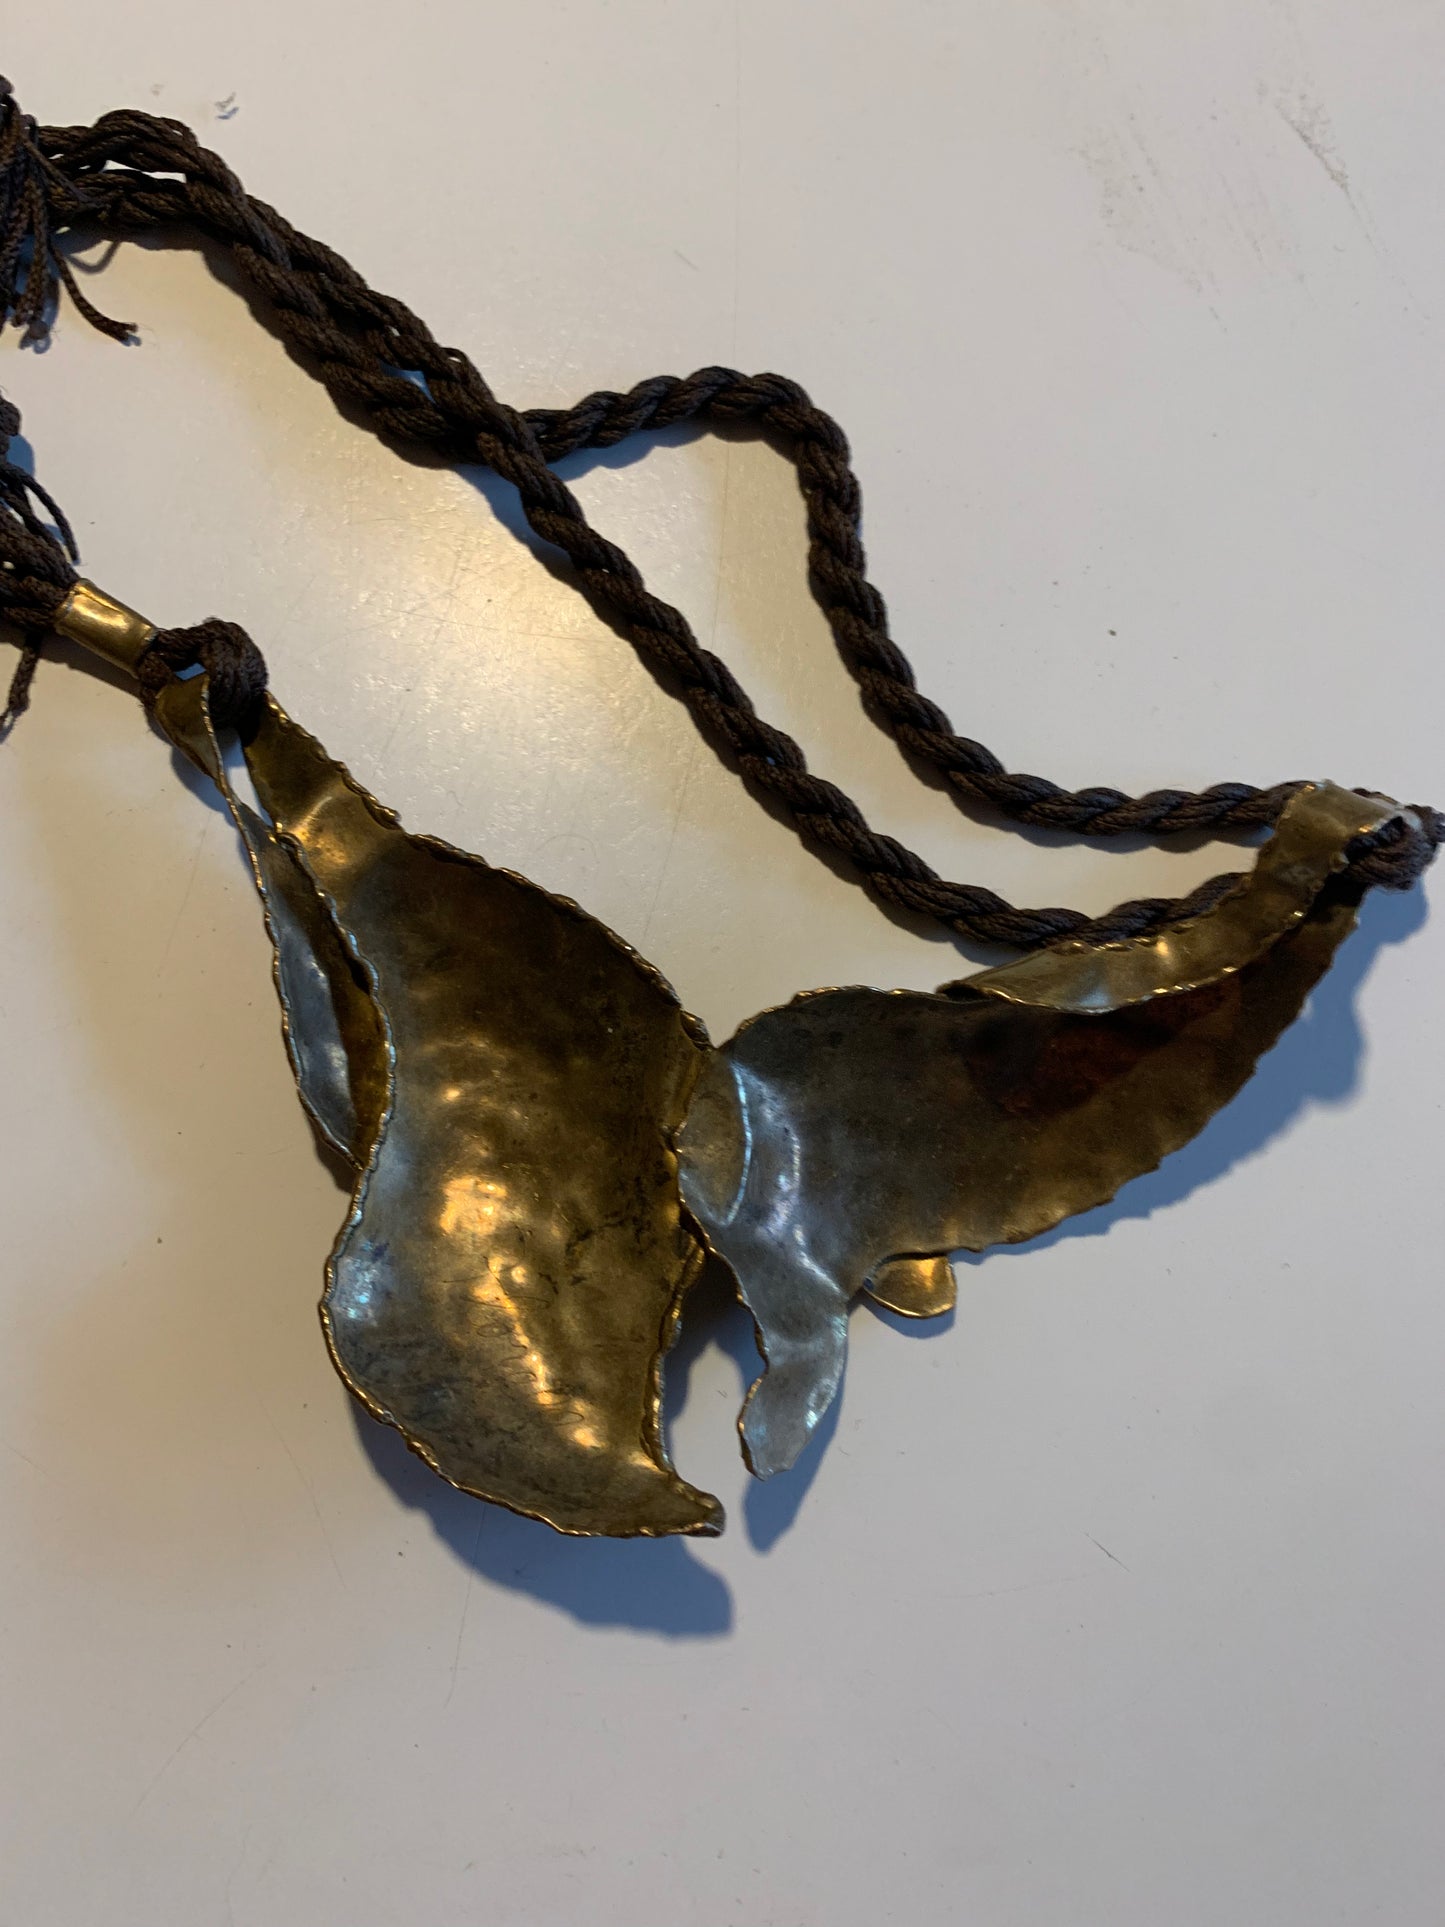 Hand Made Metal Shield Pendant and Silk Cord Abstract Art Necklace circa 1980s